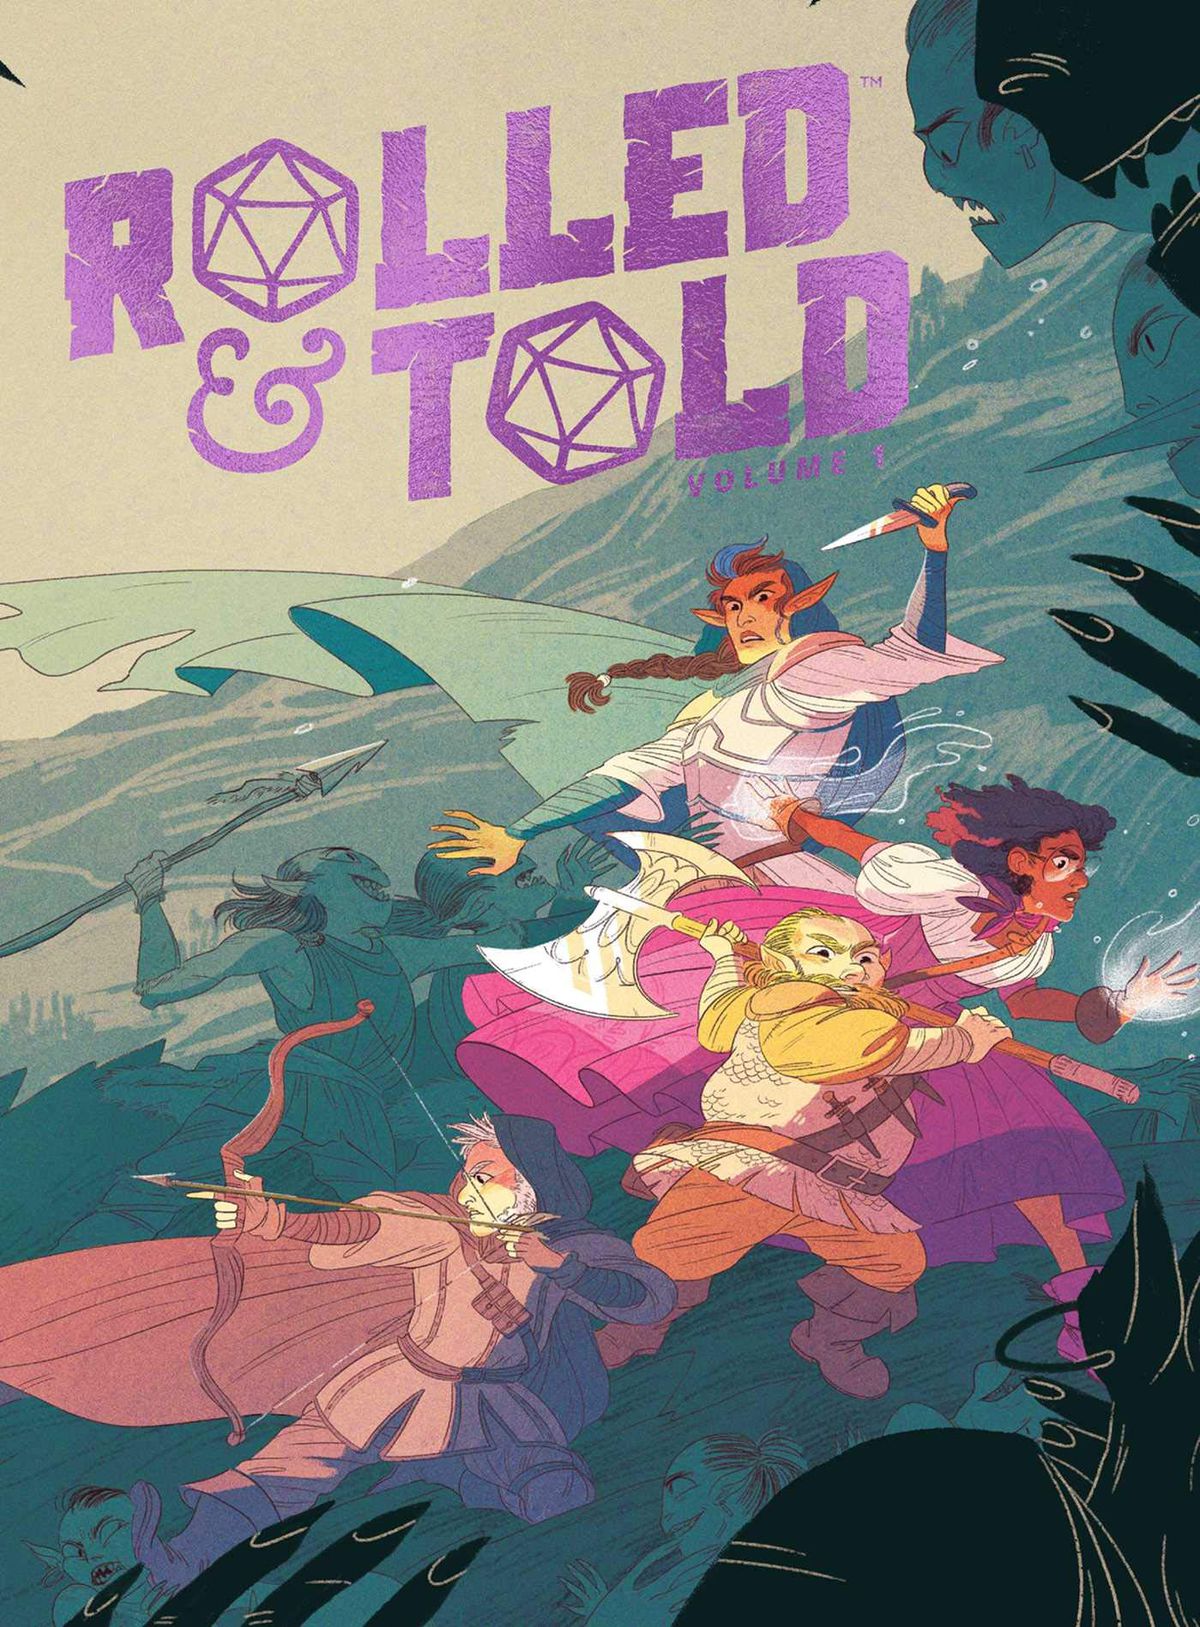 Cover art for Rolled & amp;  Told Volume 1 features an array of champions in pastel shades.